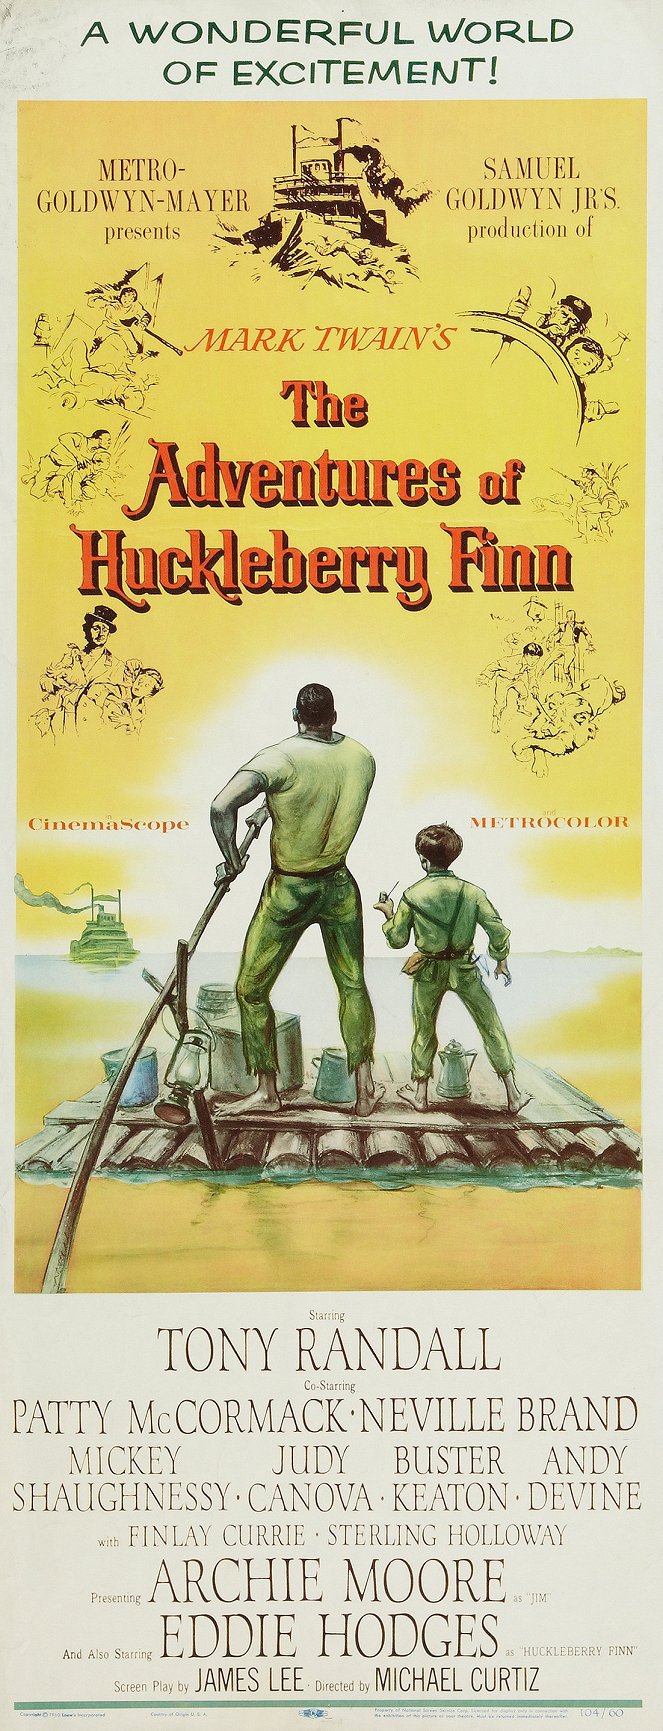 The Adventures of Huckleberry Finn - Posters